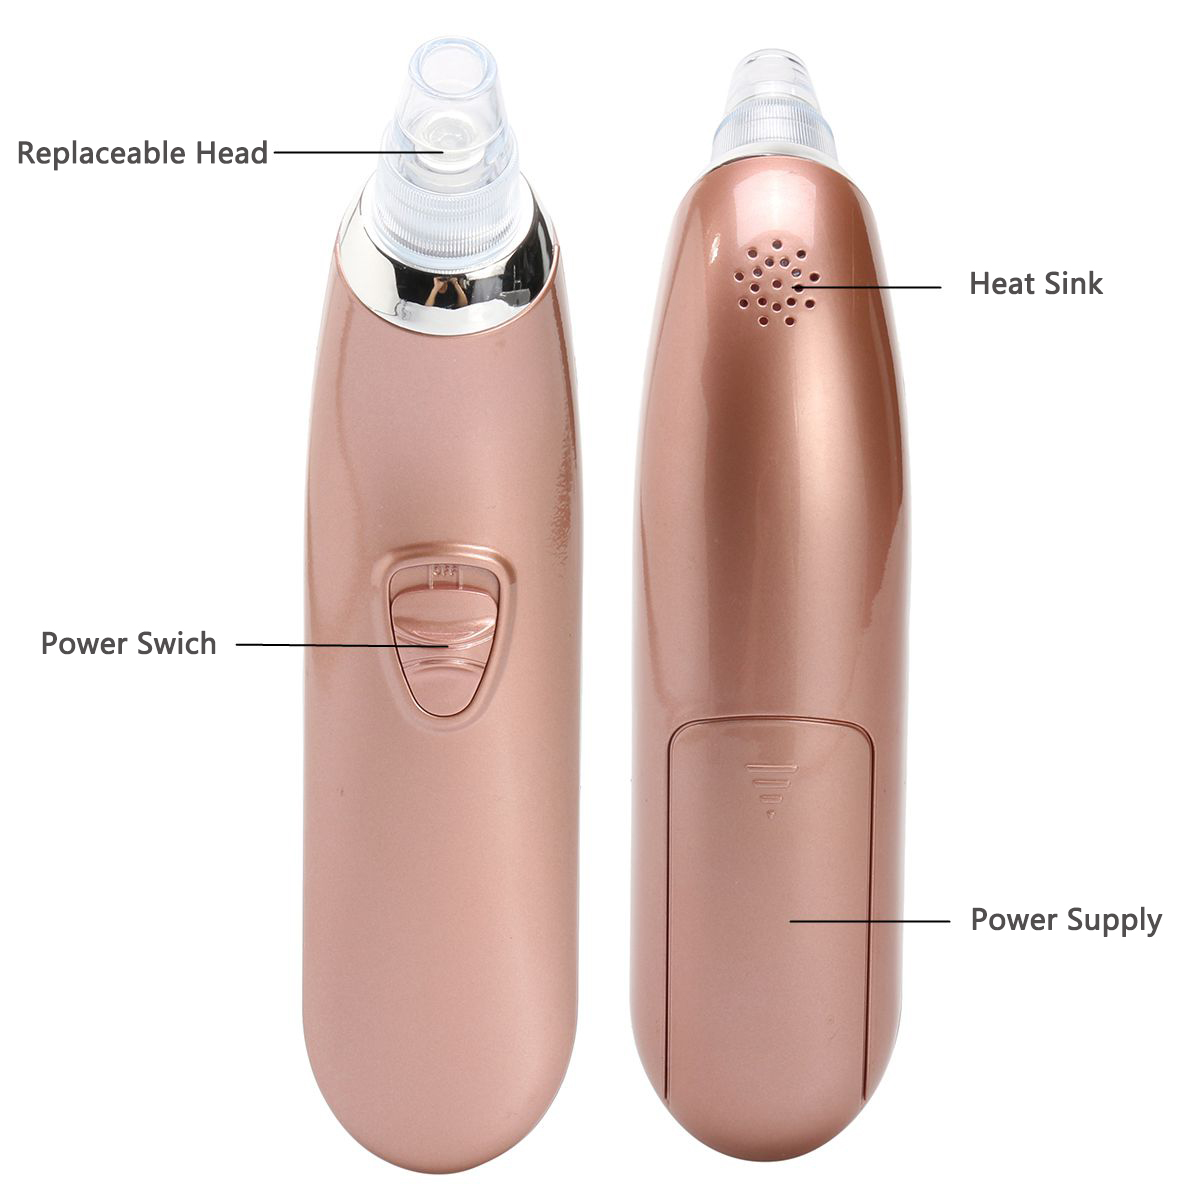 Electric Facial Vacuum Blackhead Acne Remover Nose Pore Deep Cleanser Tools Lifting Firming Skin